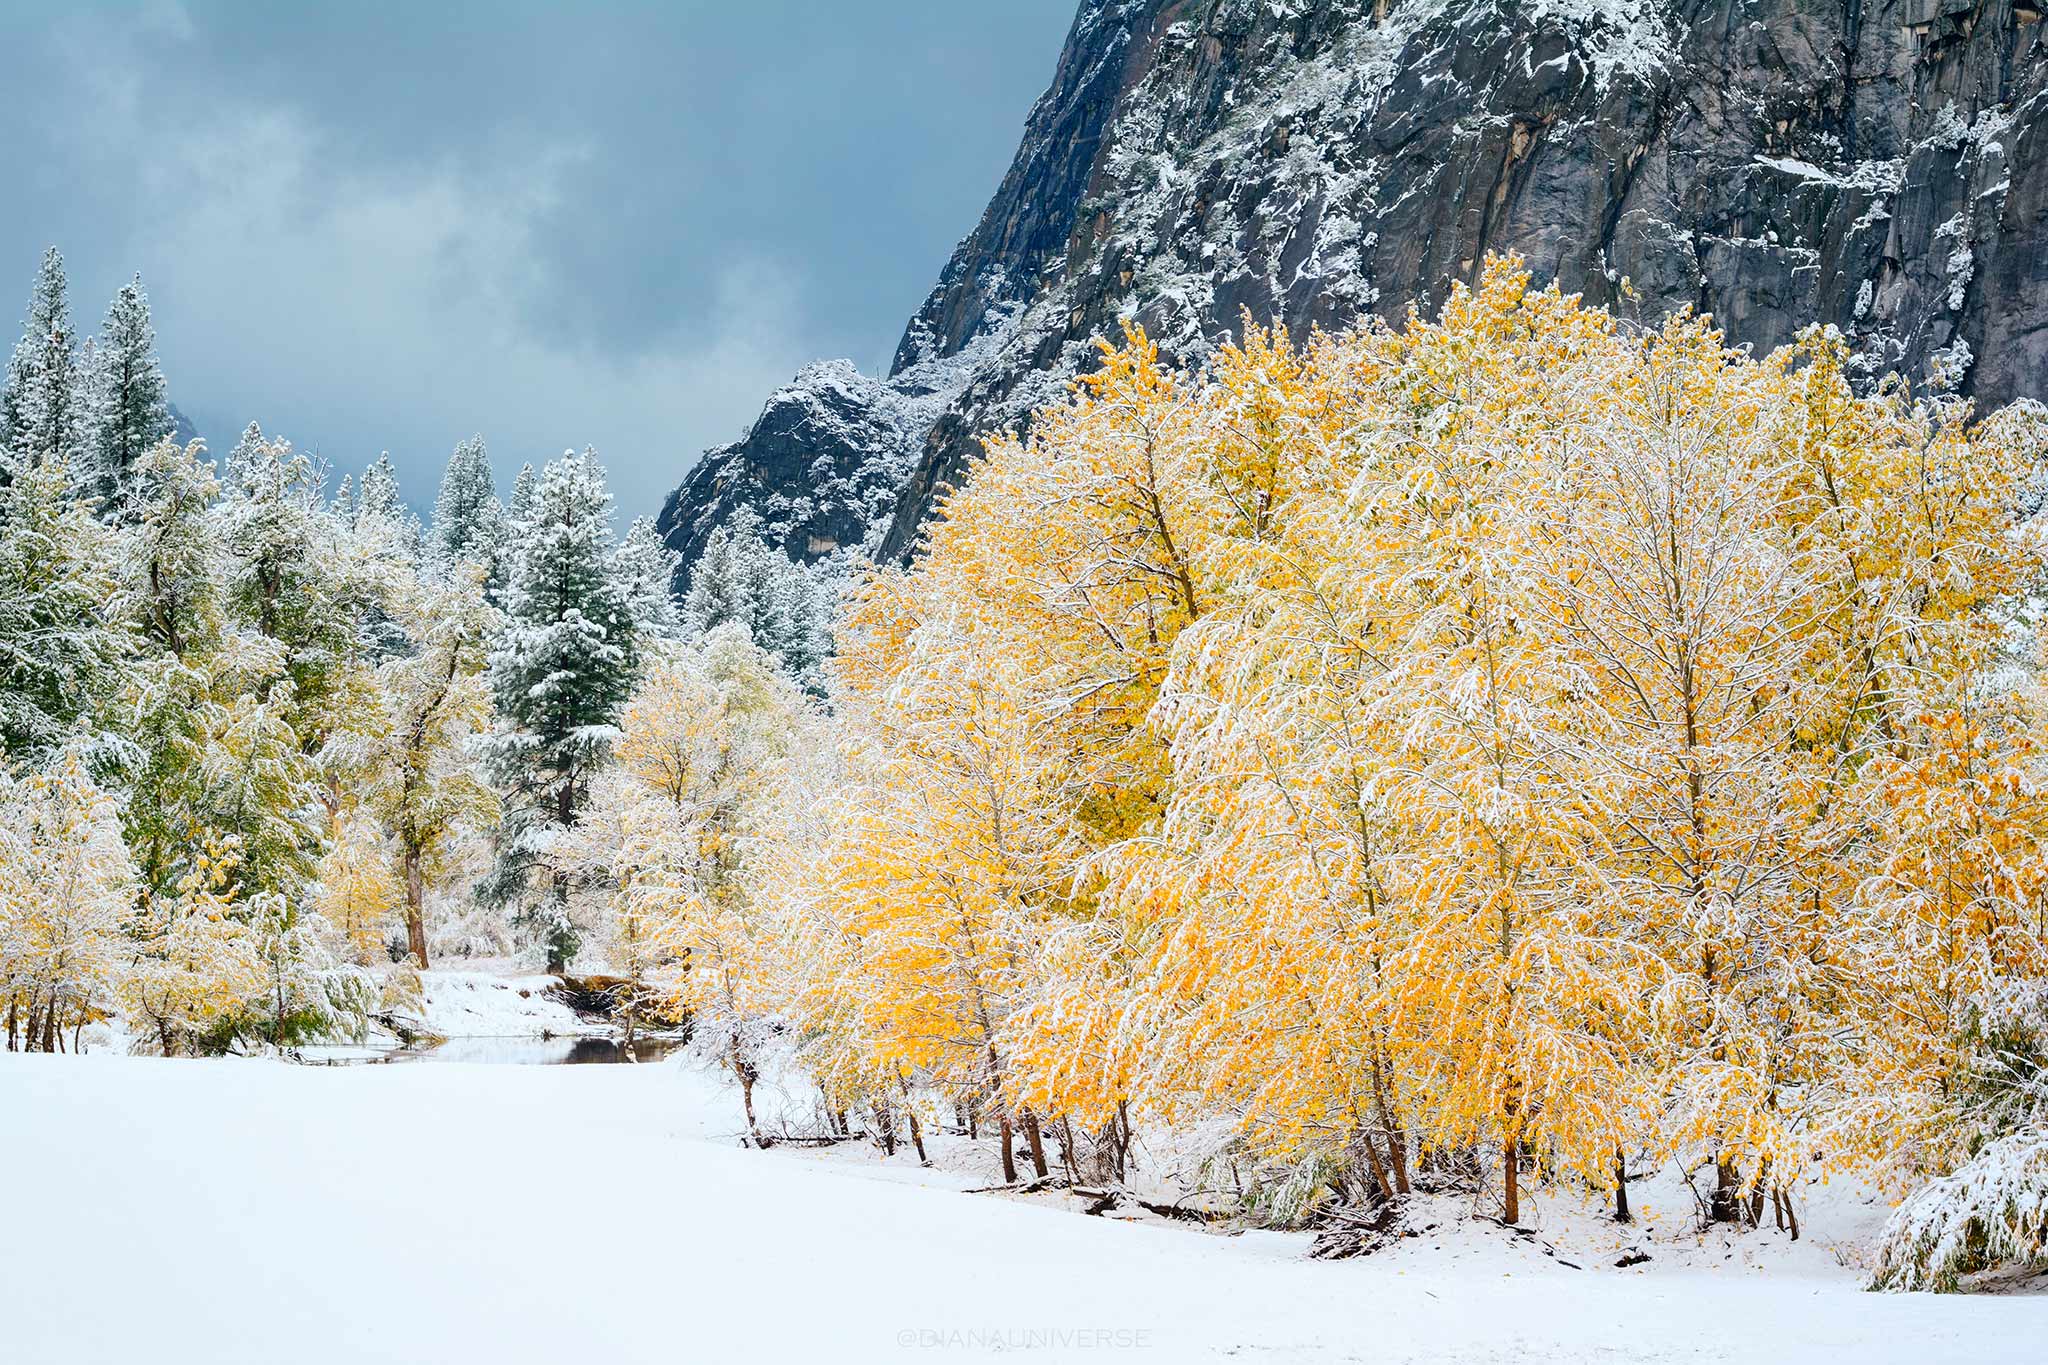 Snowliage' – Photographing The Collision Of Fall & Winter, Sony